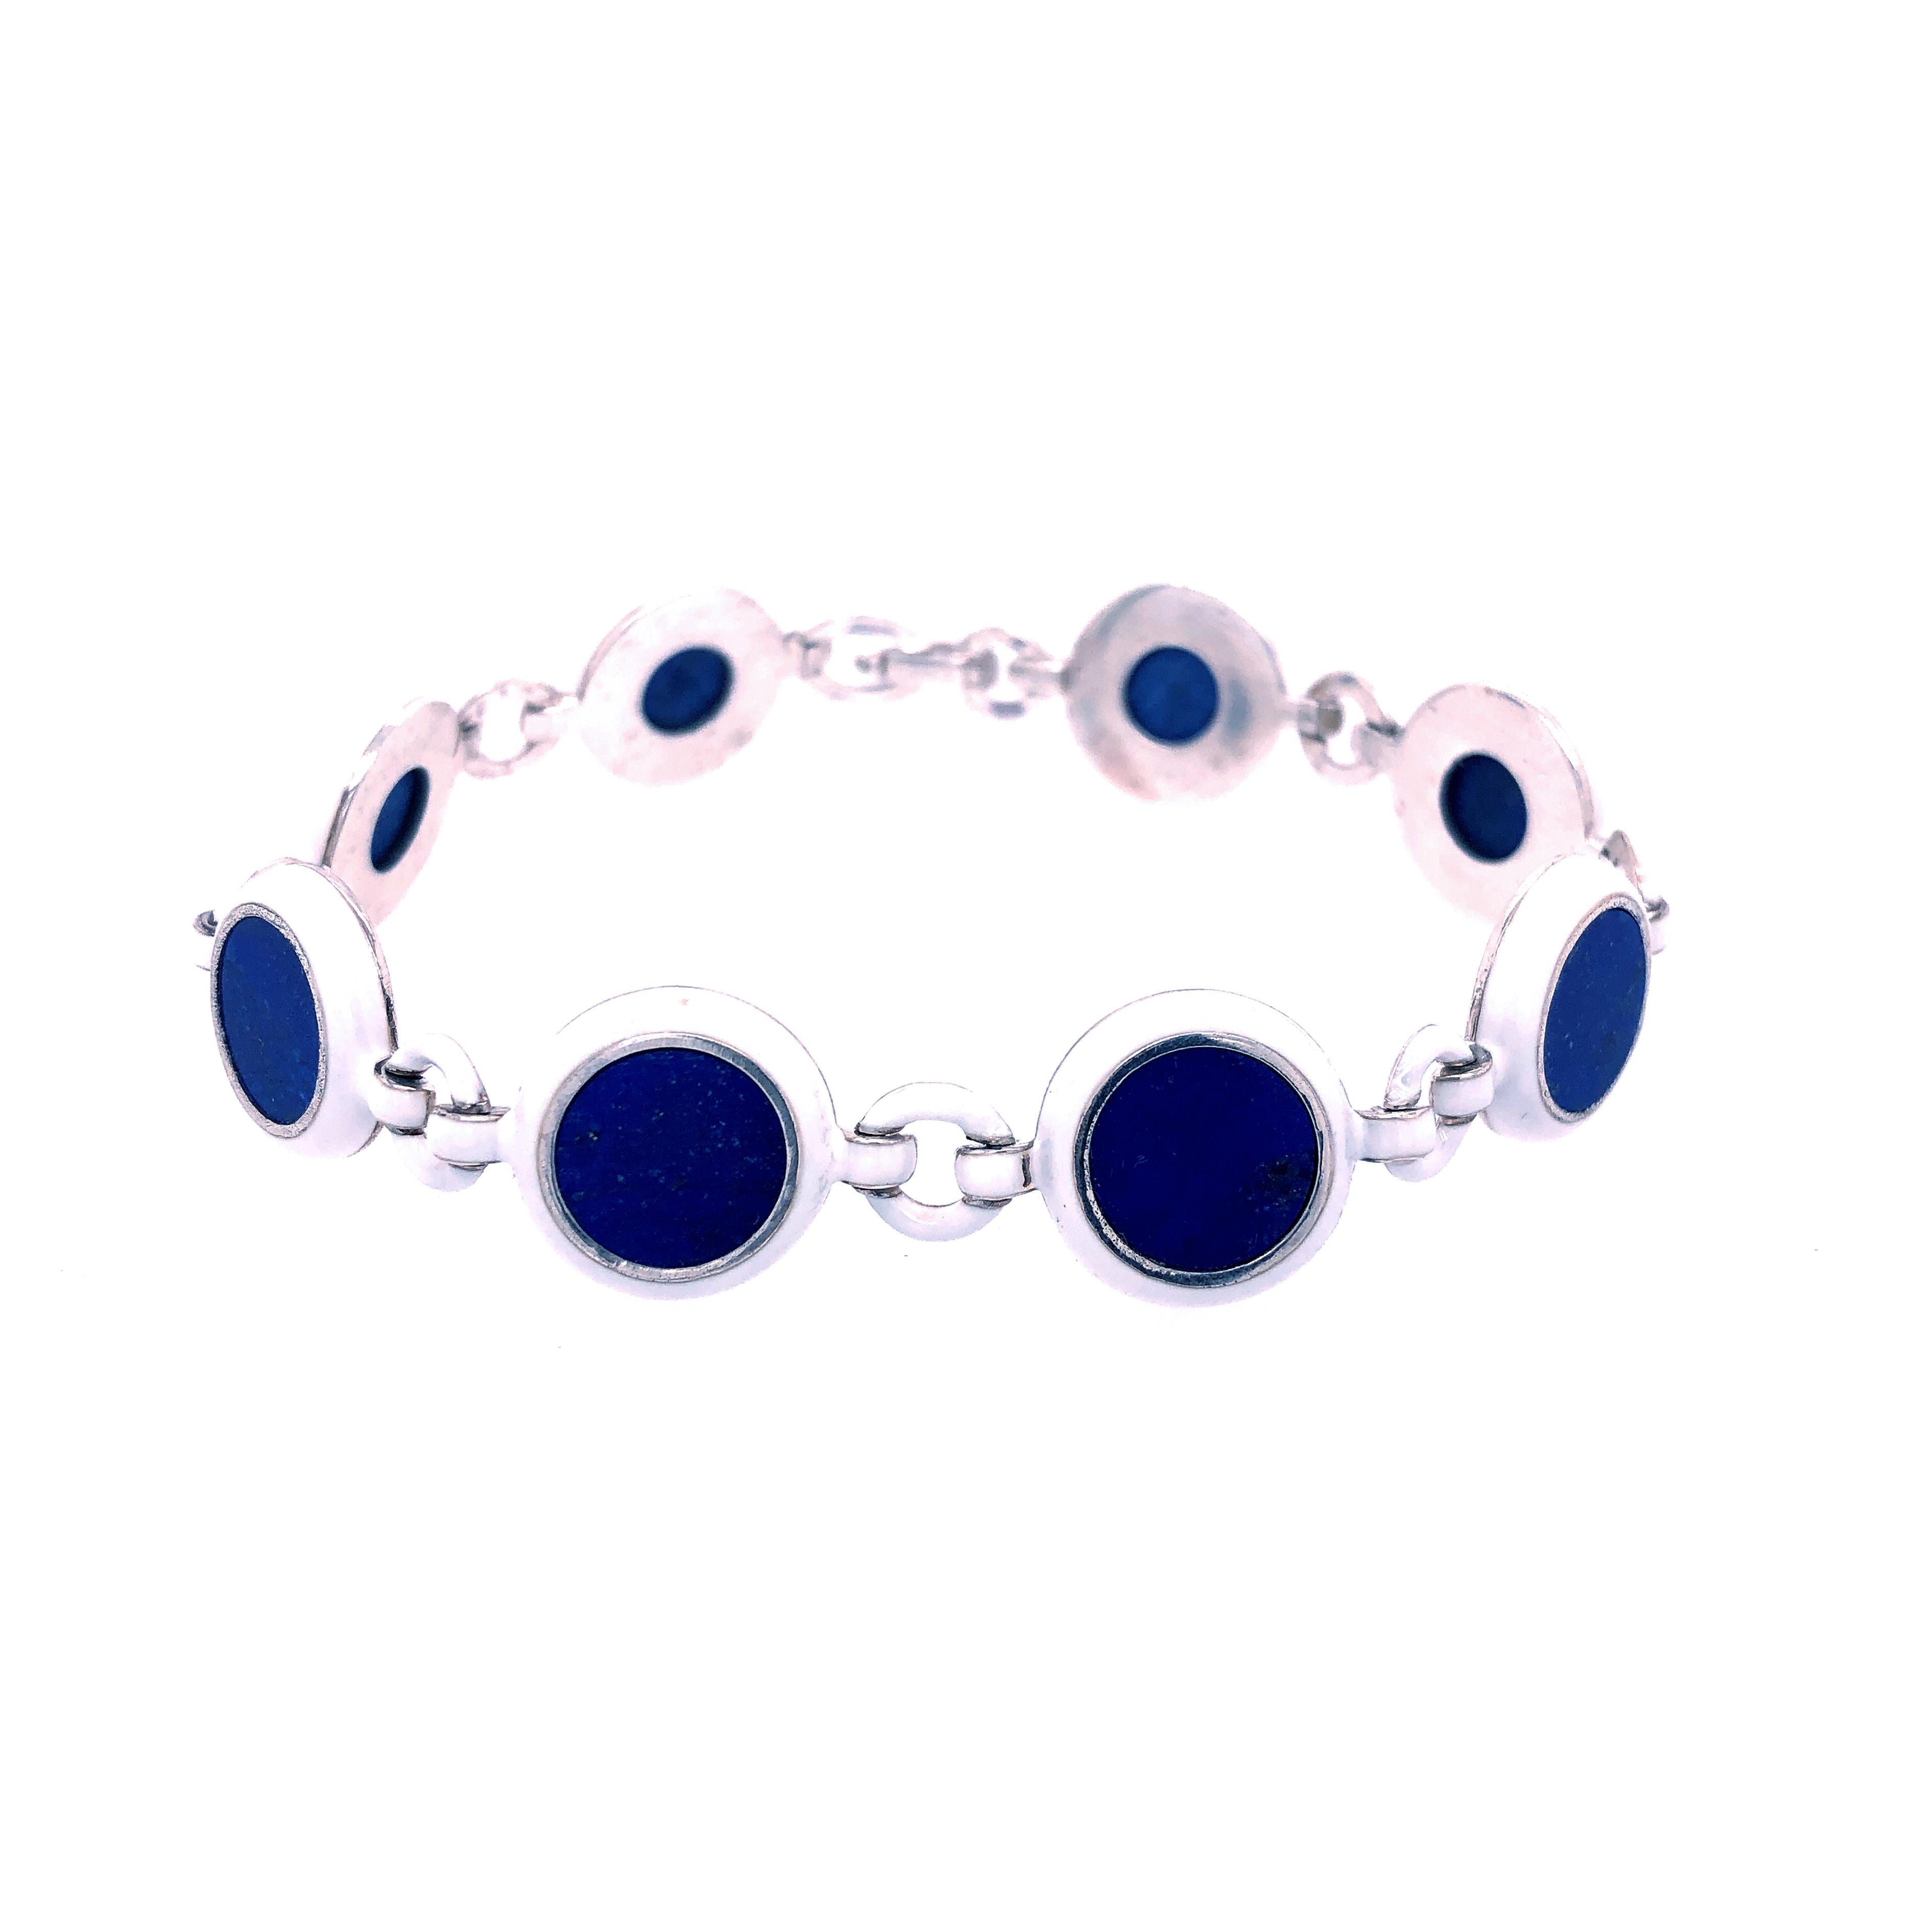 Chic yet Timeless One-of-a-kind Bracelet featuring 43Kt Natural Hand Inlaid Blue Lapis Lazuli Disk in a 0.75OzT White Hand Enameled Handcrafted Sterling Silver Setting.

In our fitted Black Box and Pouch
Bracelet Total Lenght is 7.55 inches, 192mm 